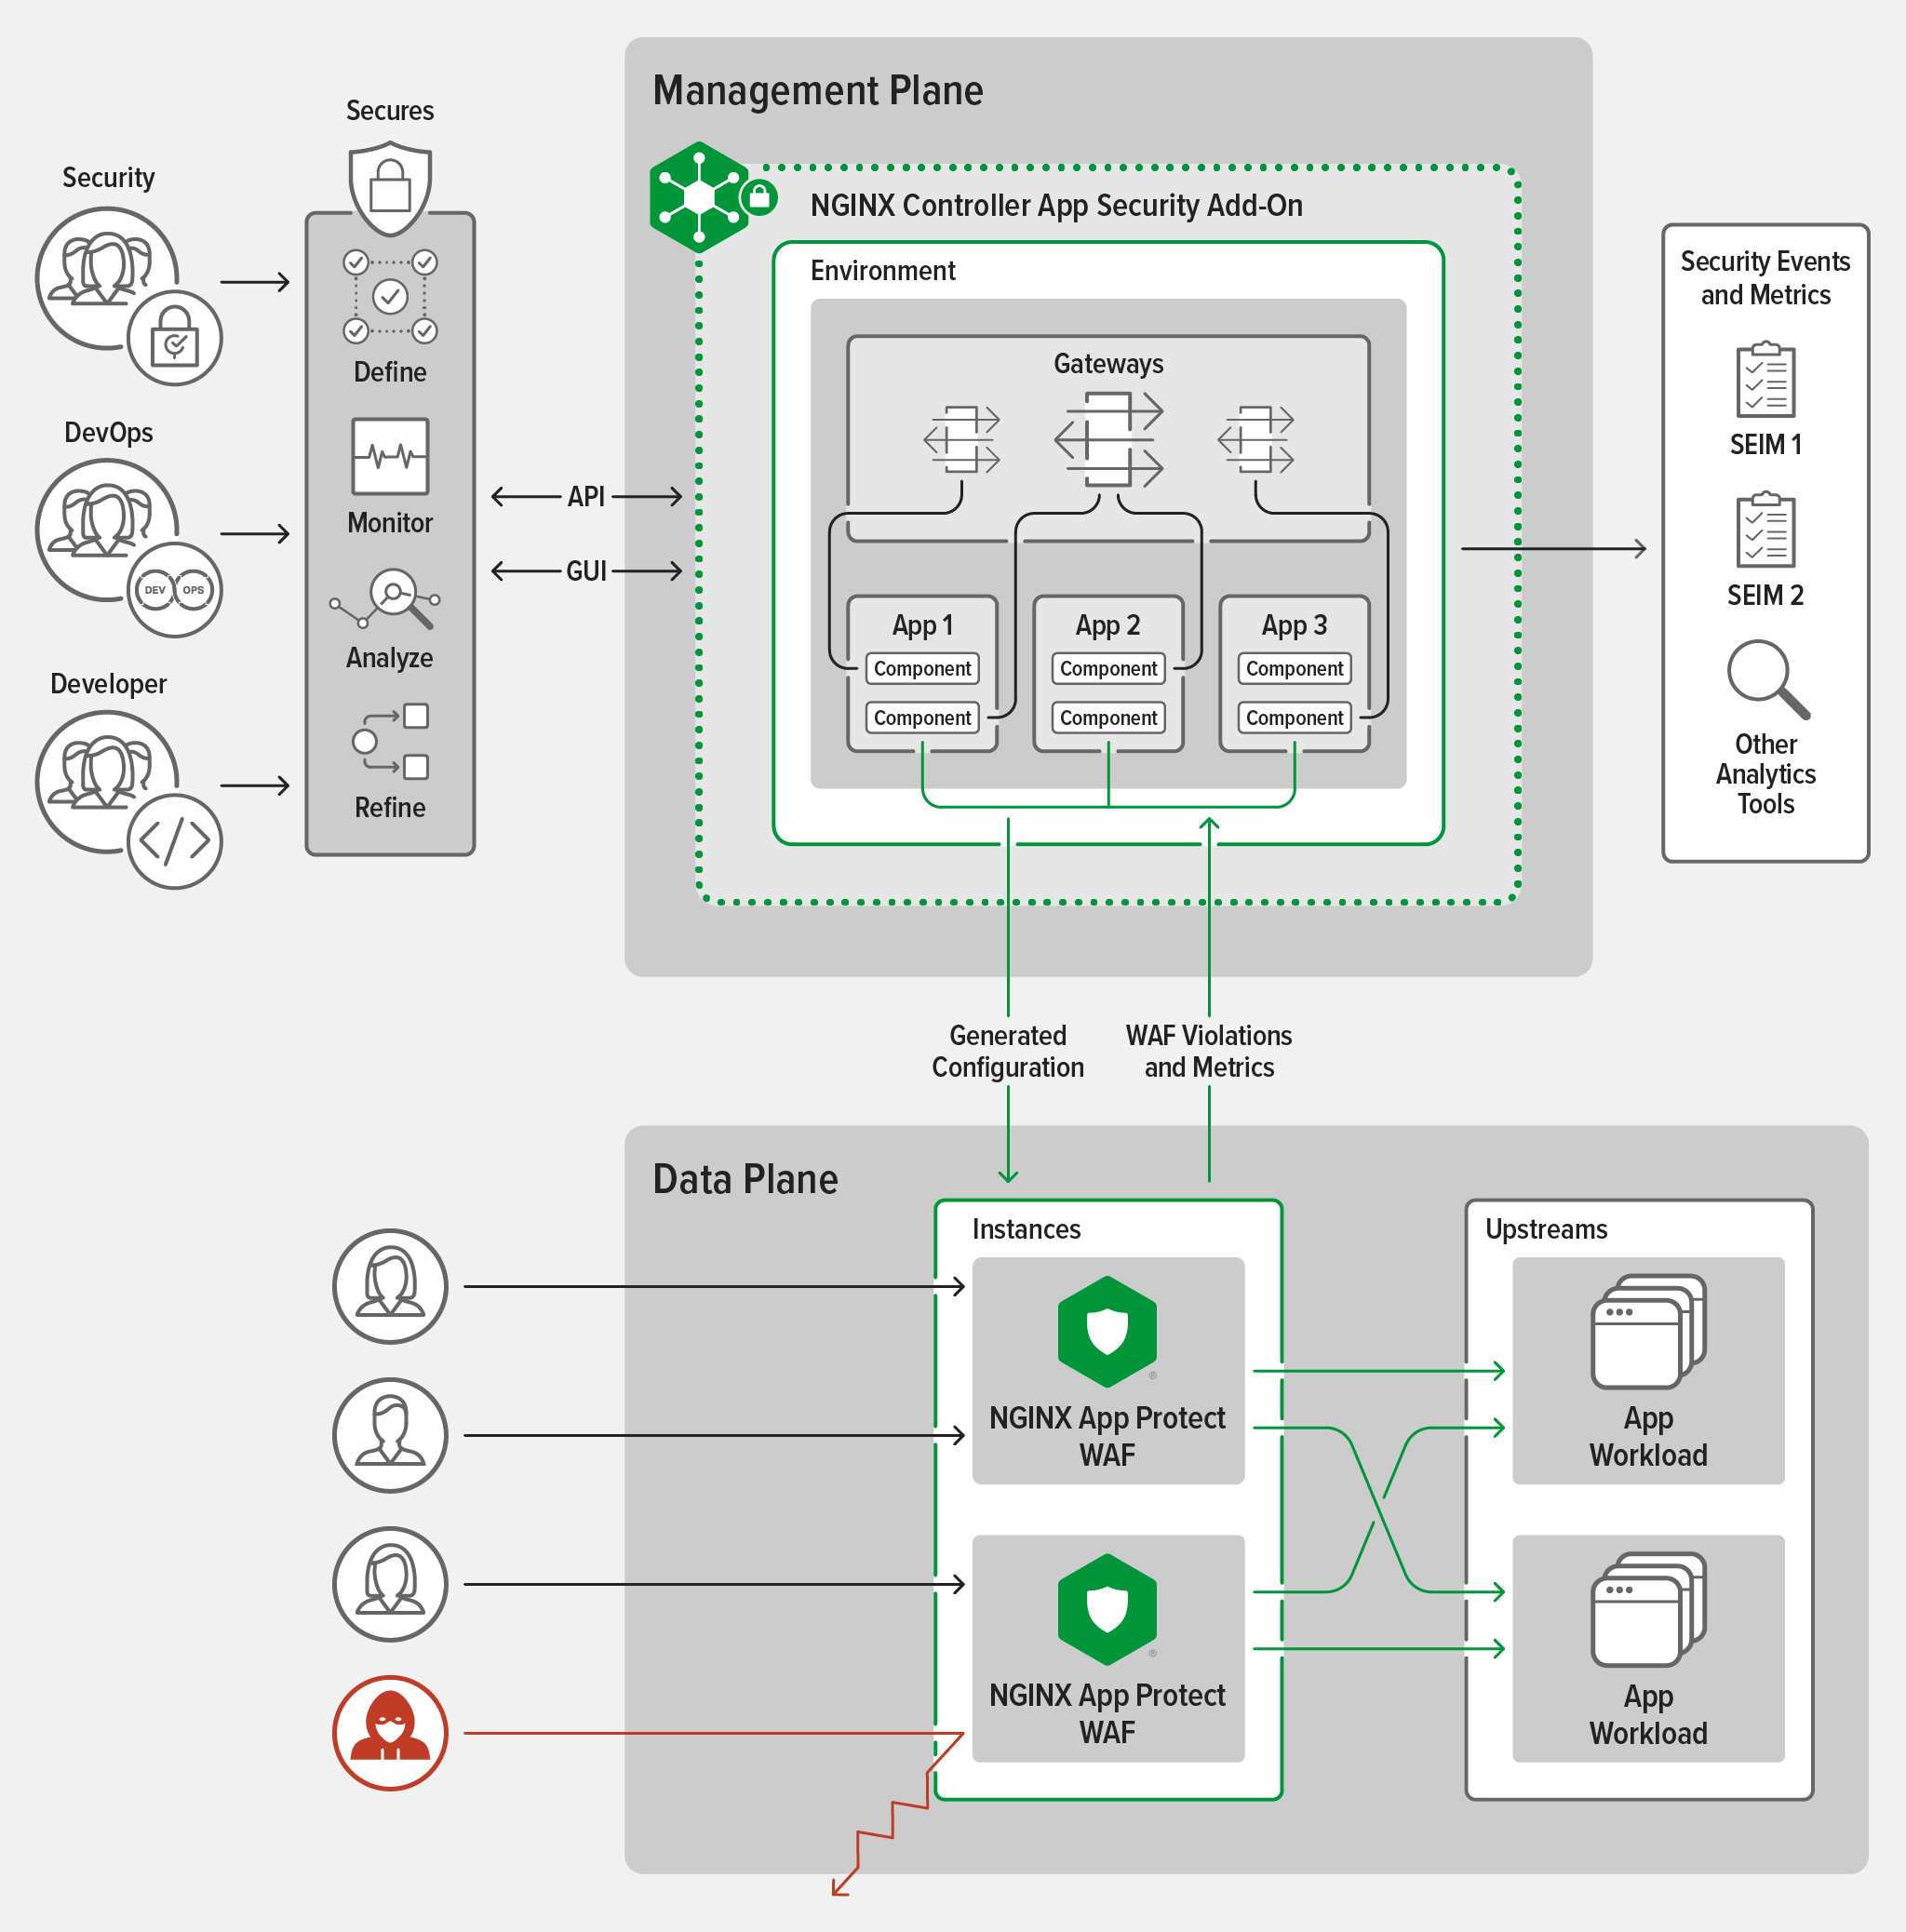 Topology diagram showing NGINX Controller App Security Add-On operating on the management plane and NGINX App Protect WAF operating on the data plane